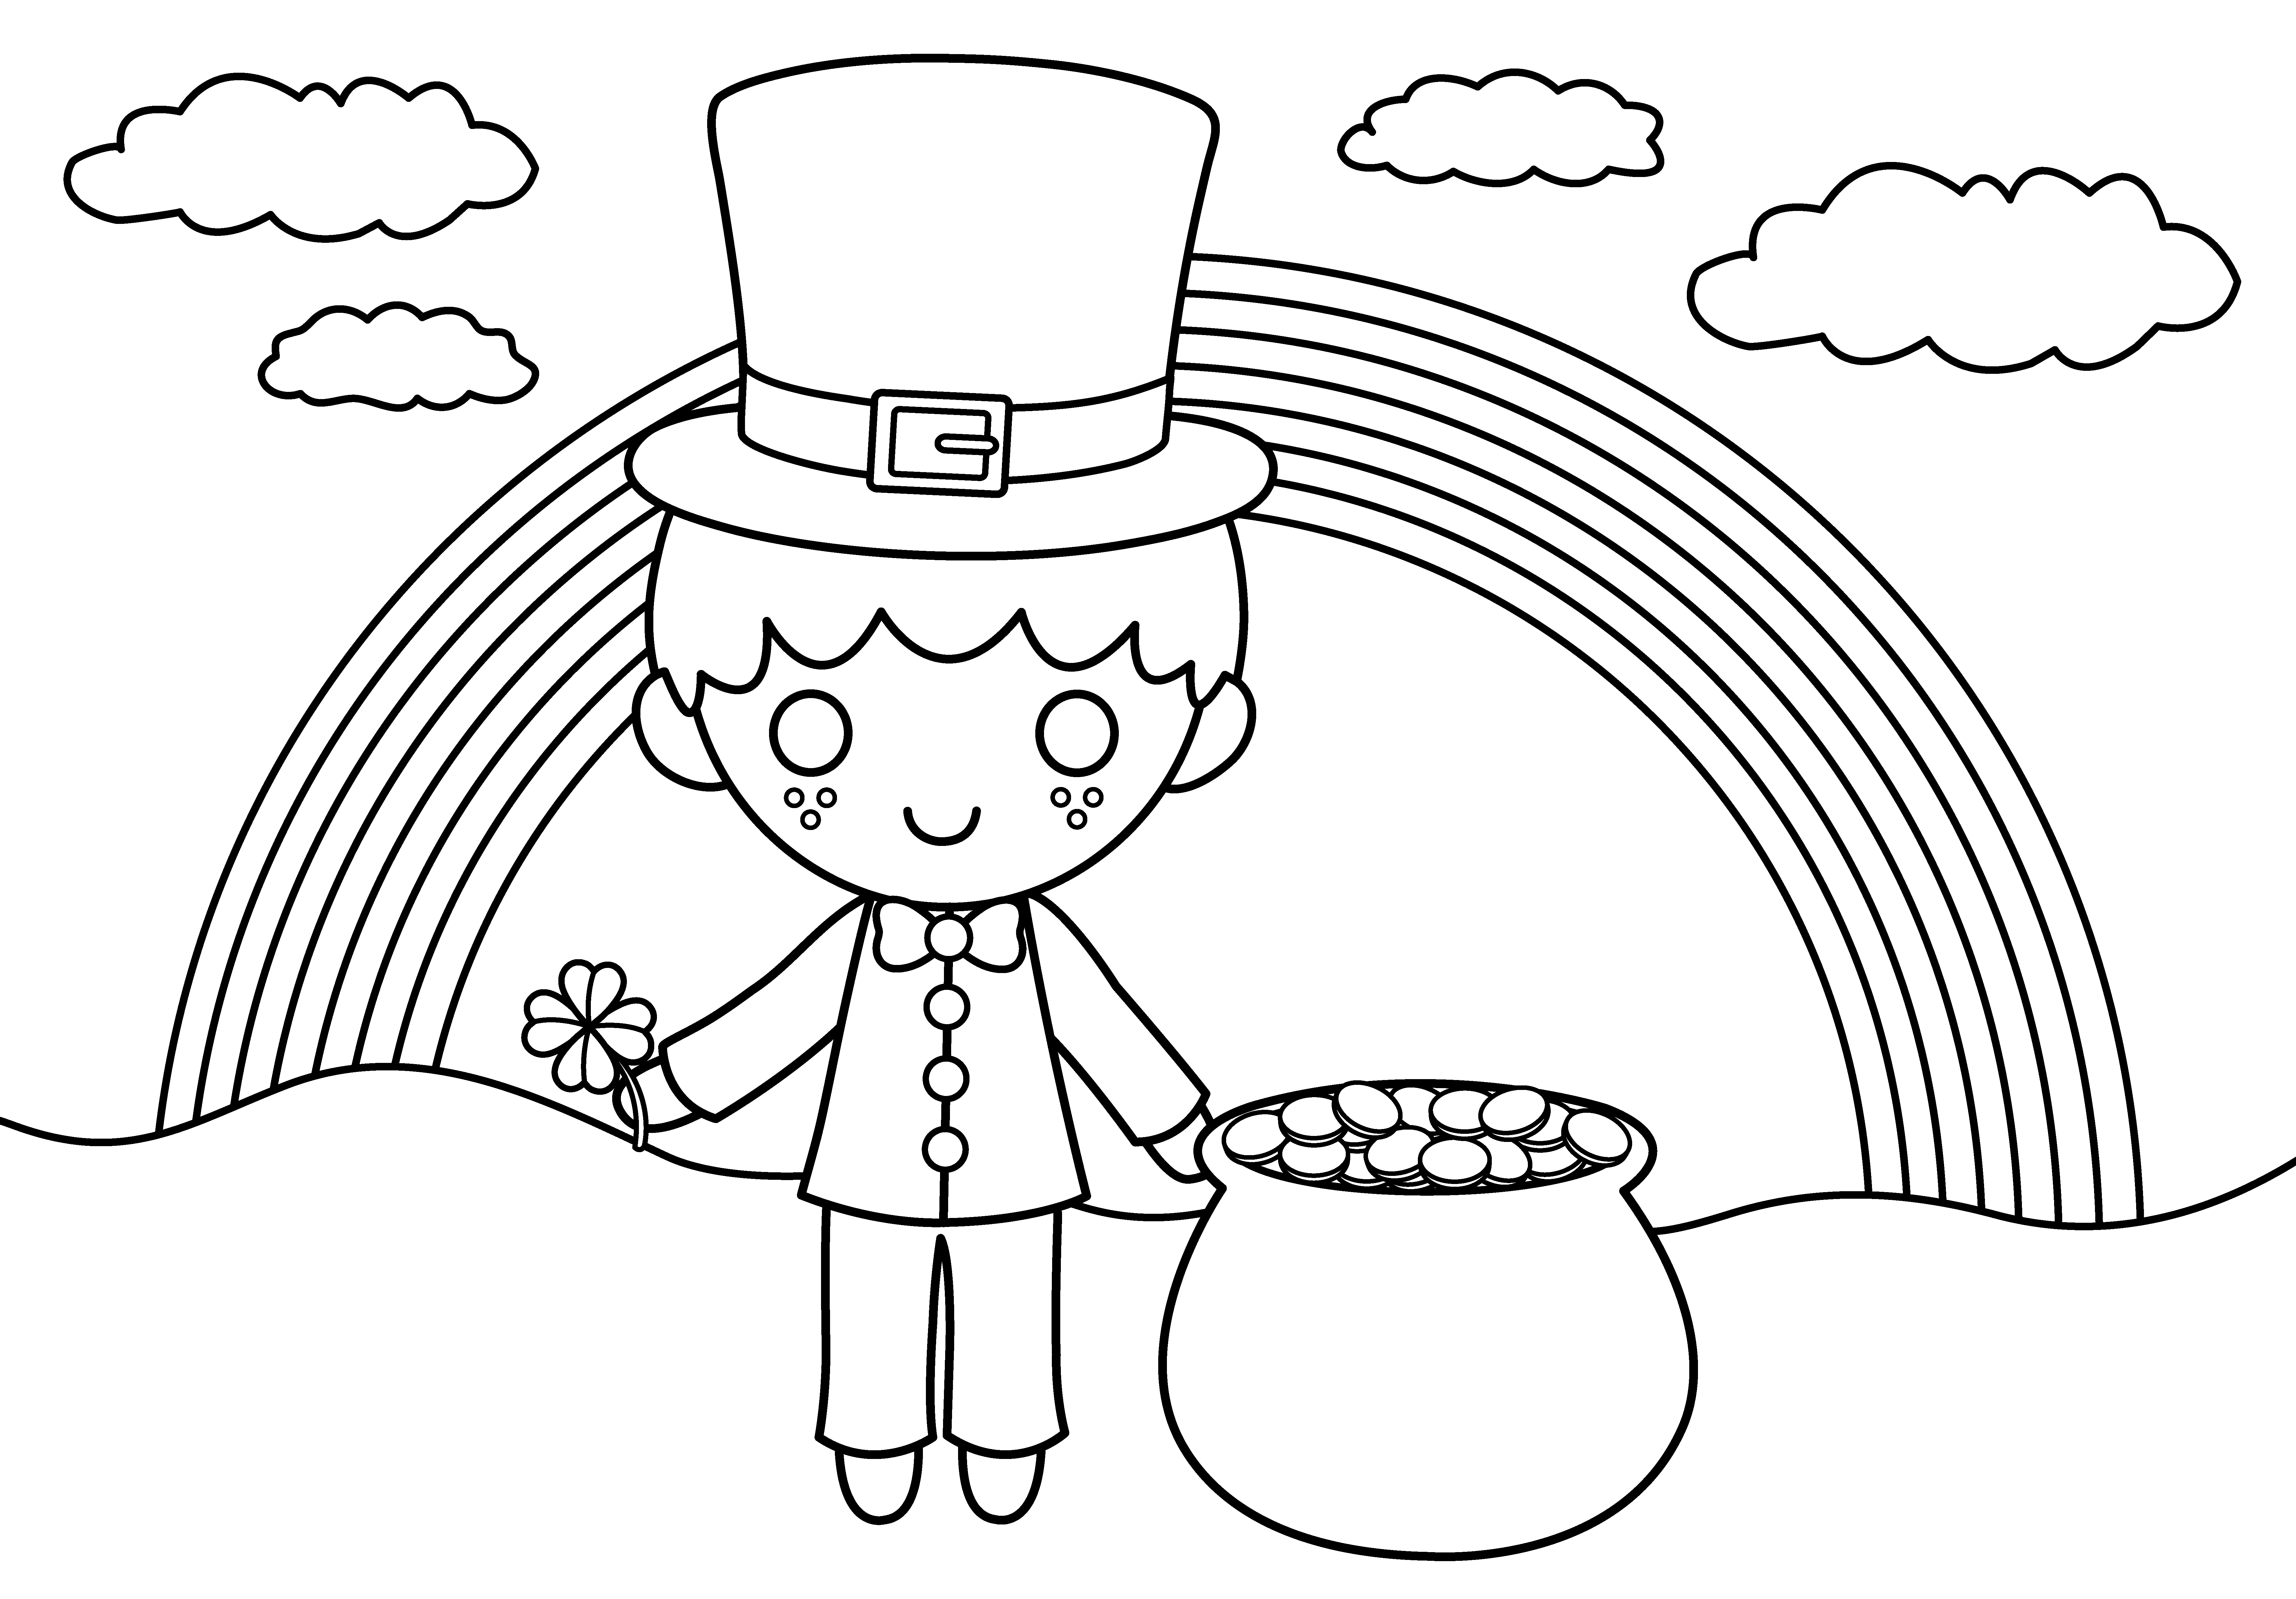 Leprechaun Coloring Pages Printable at GetDrawings Free download